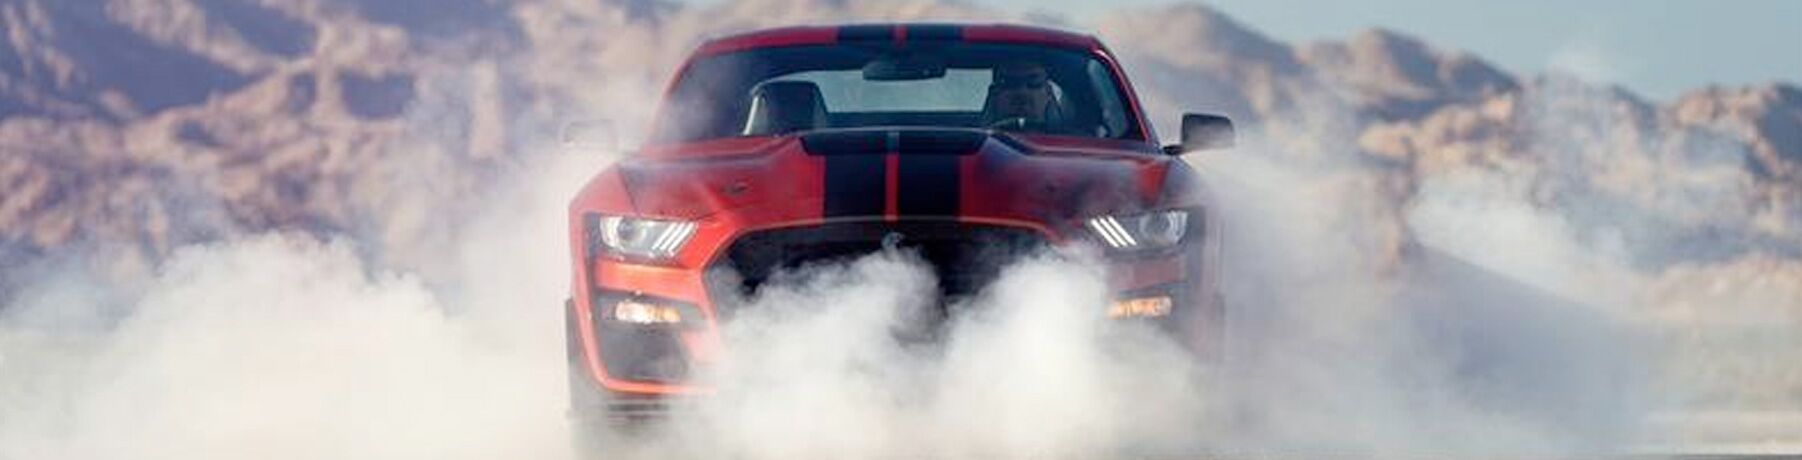 front view of a red 2020 Ford Mustang Shelby GT500